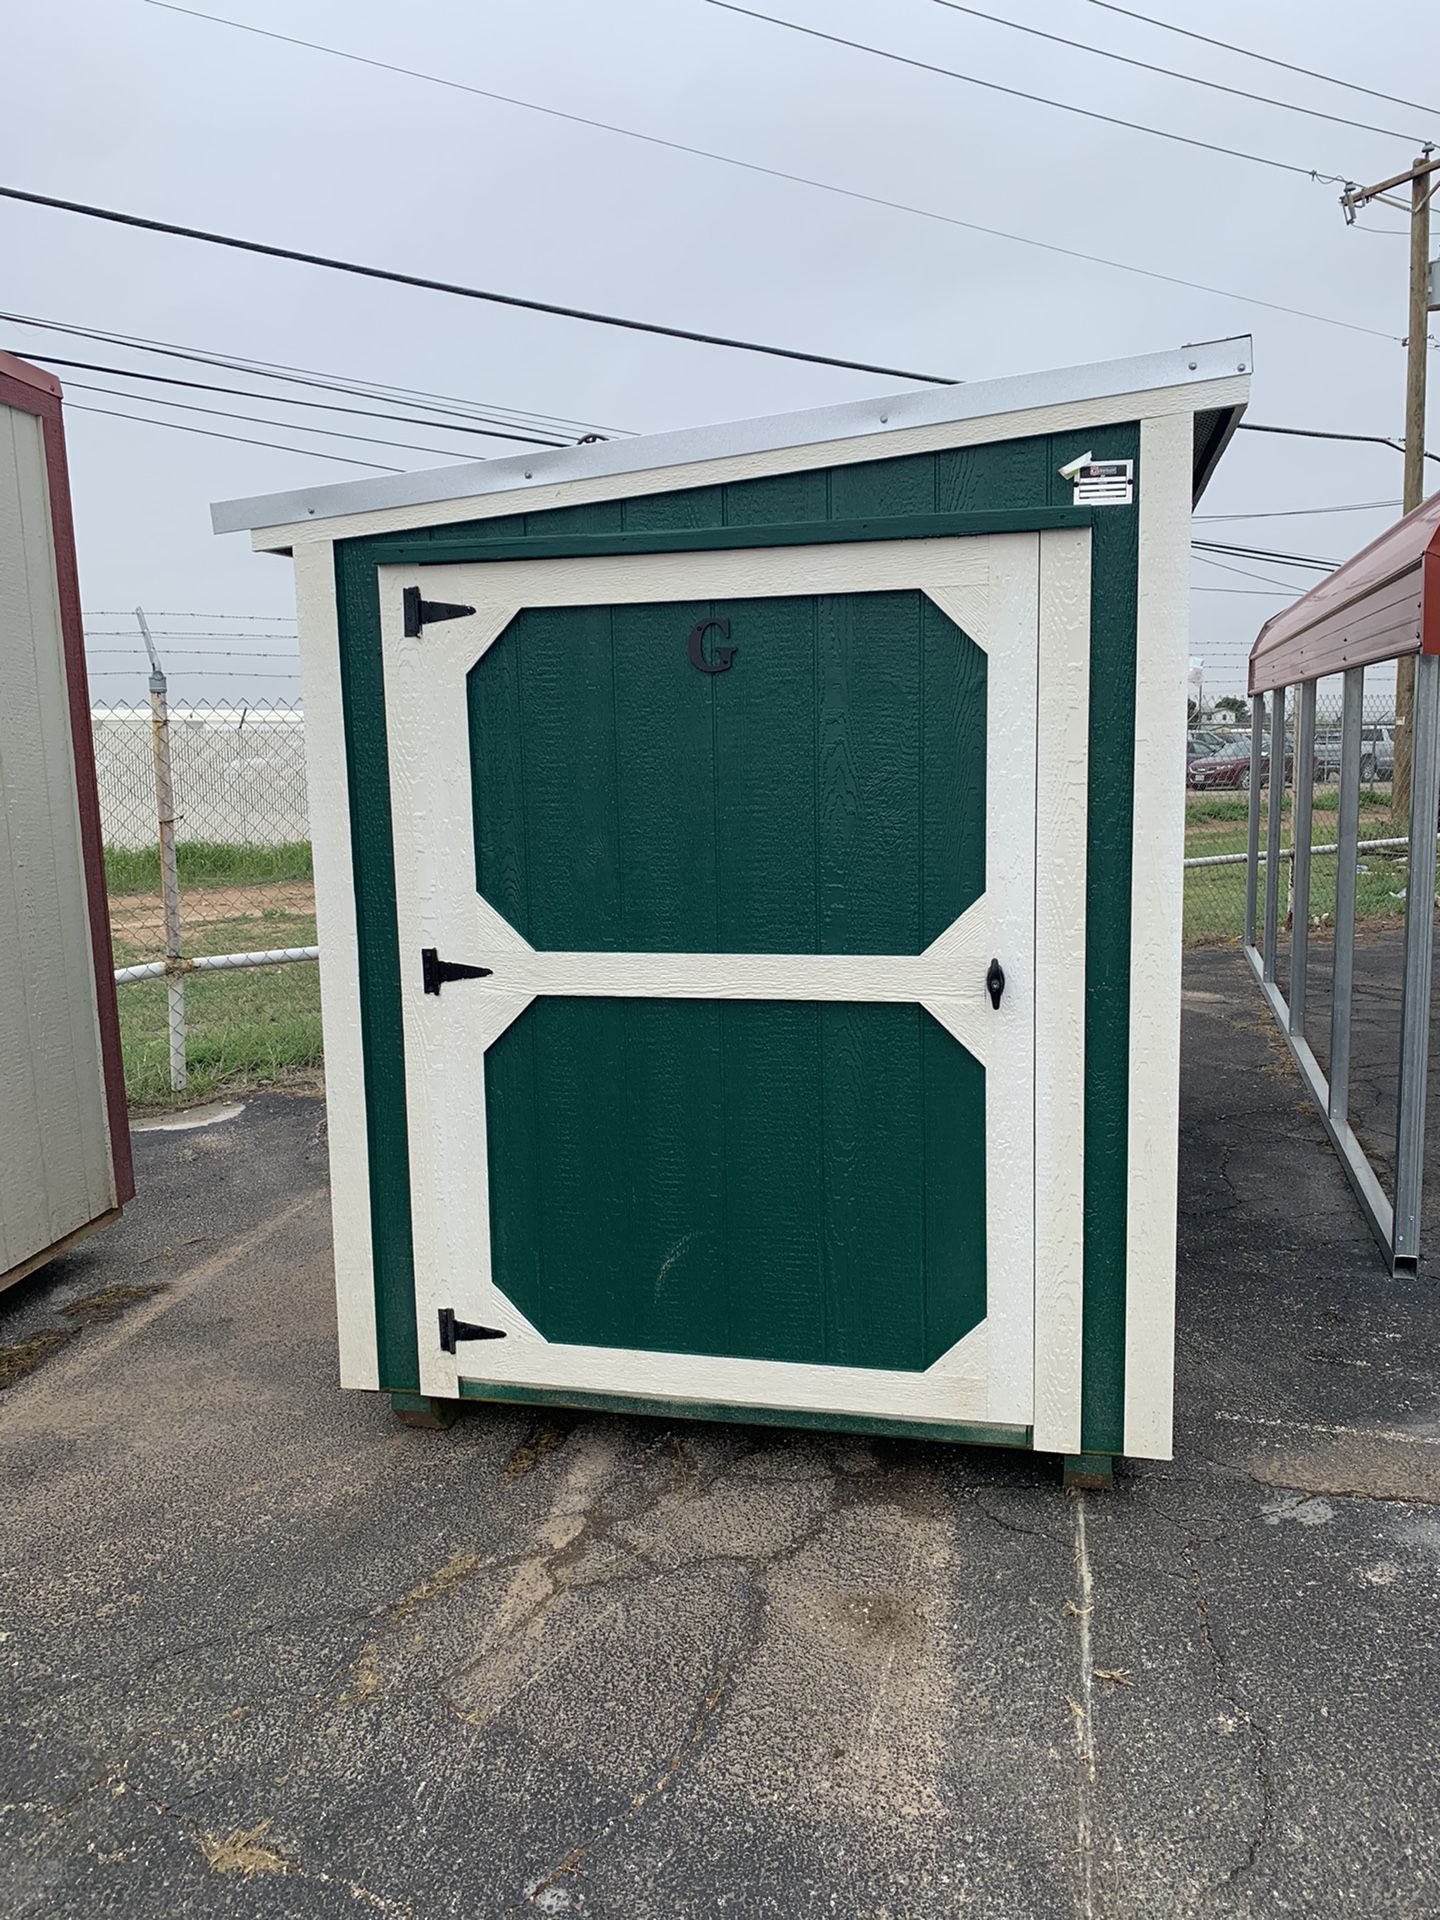 Mini shed 6x7 -99month with 99down rent to own